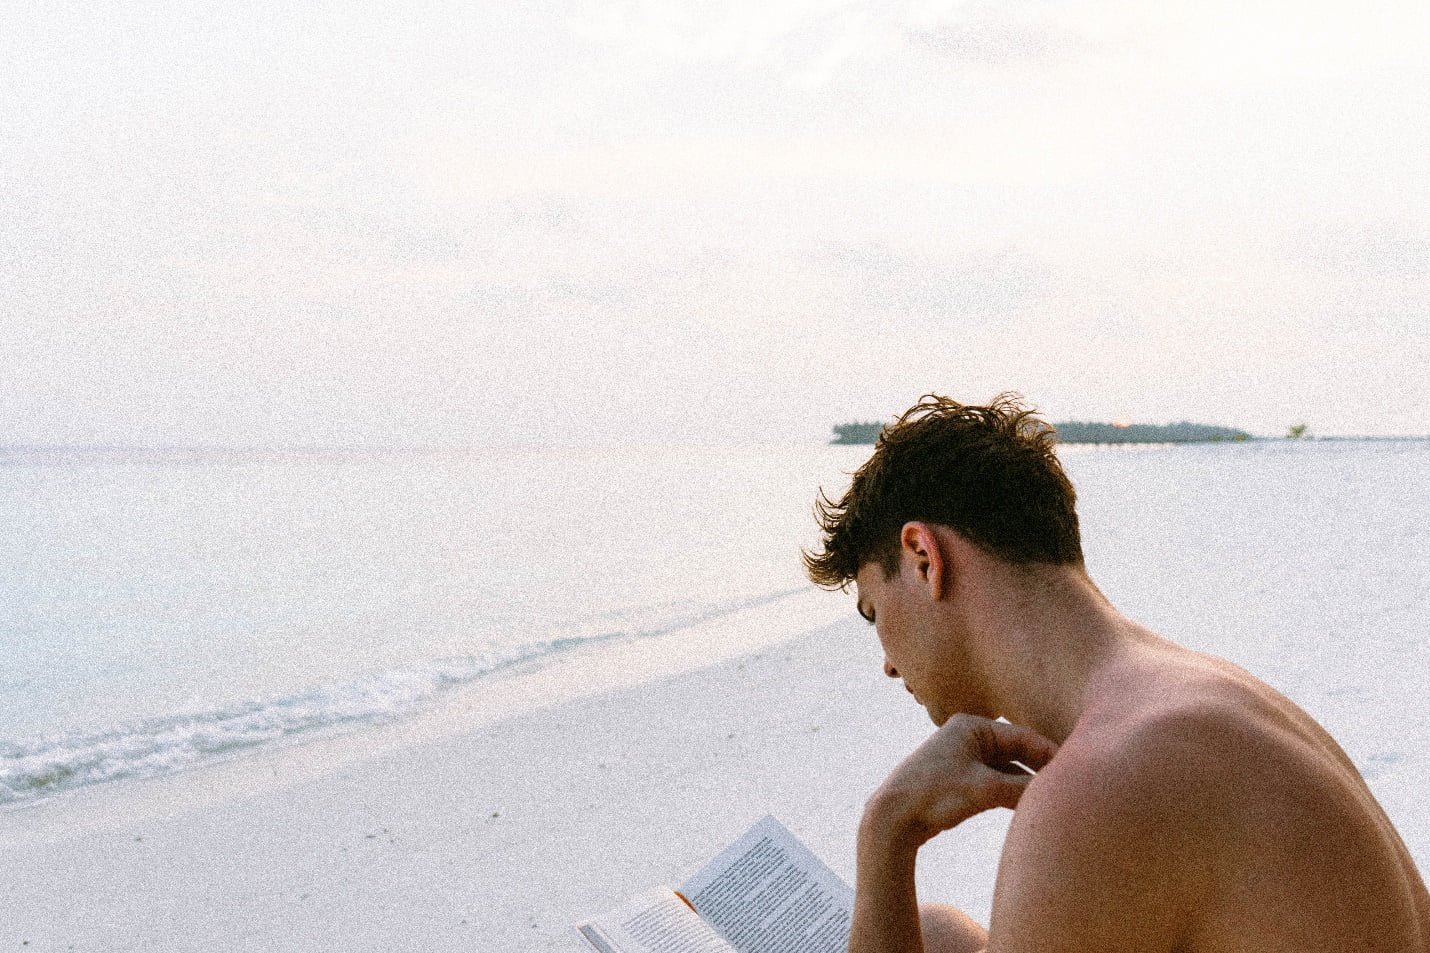 A person reading a book on a beach

Description automatically generated with medium confidence